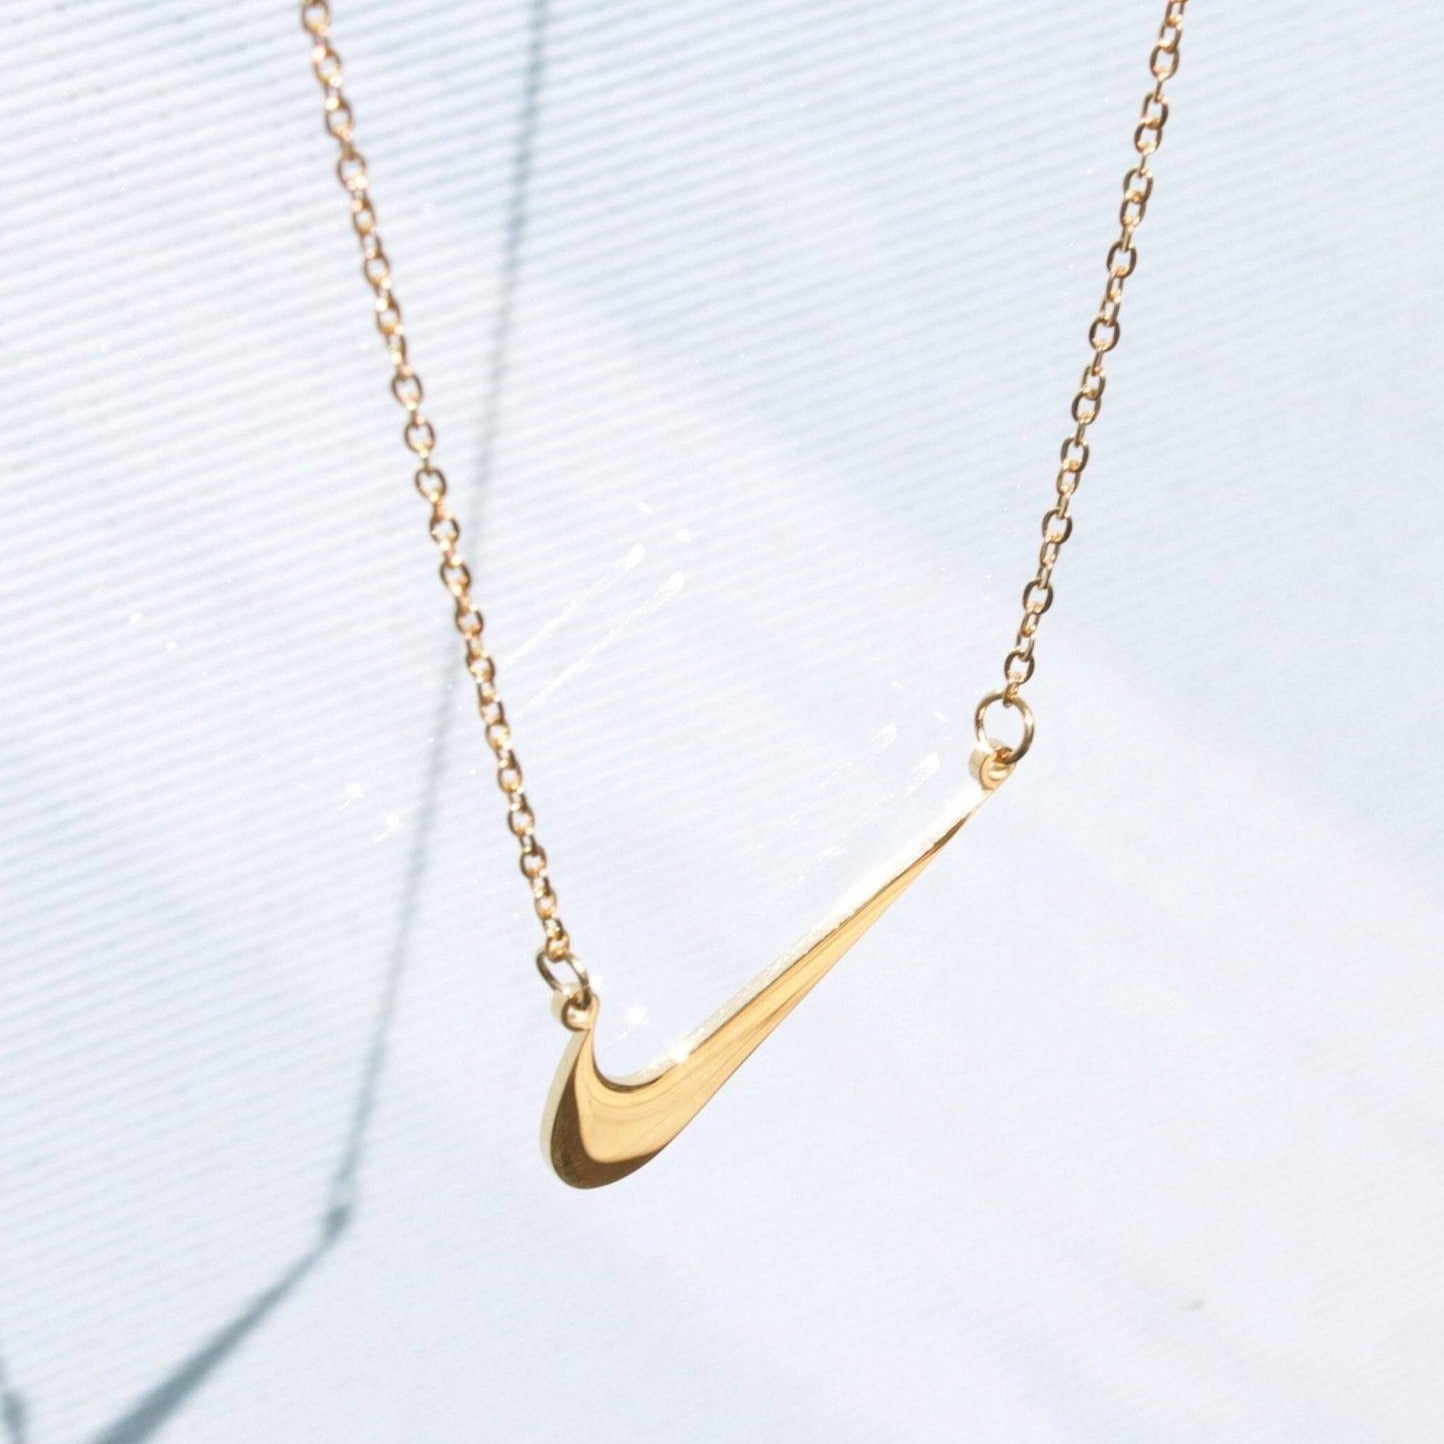 Nike Swoosh Pendant/Chain/Necklace (18k Gold Plated) - Stainless